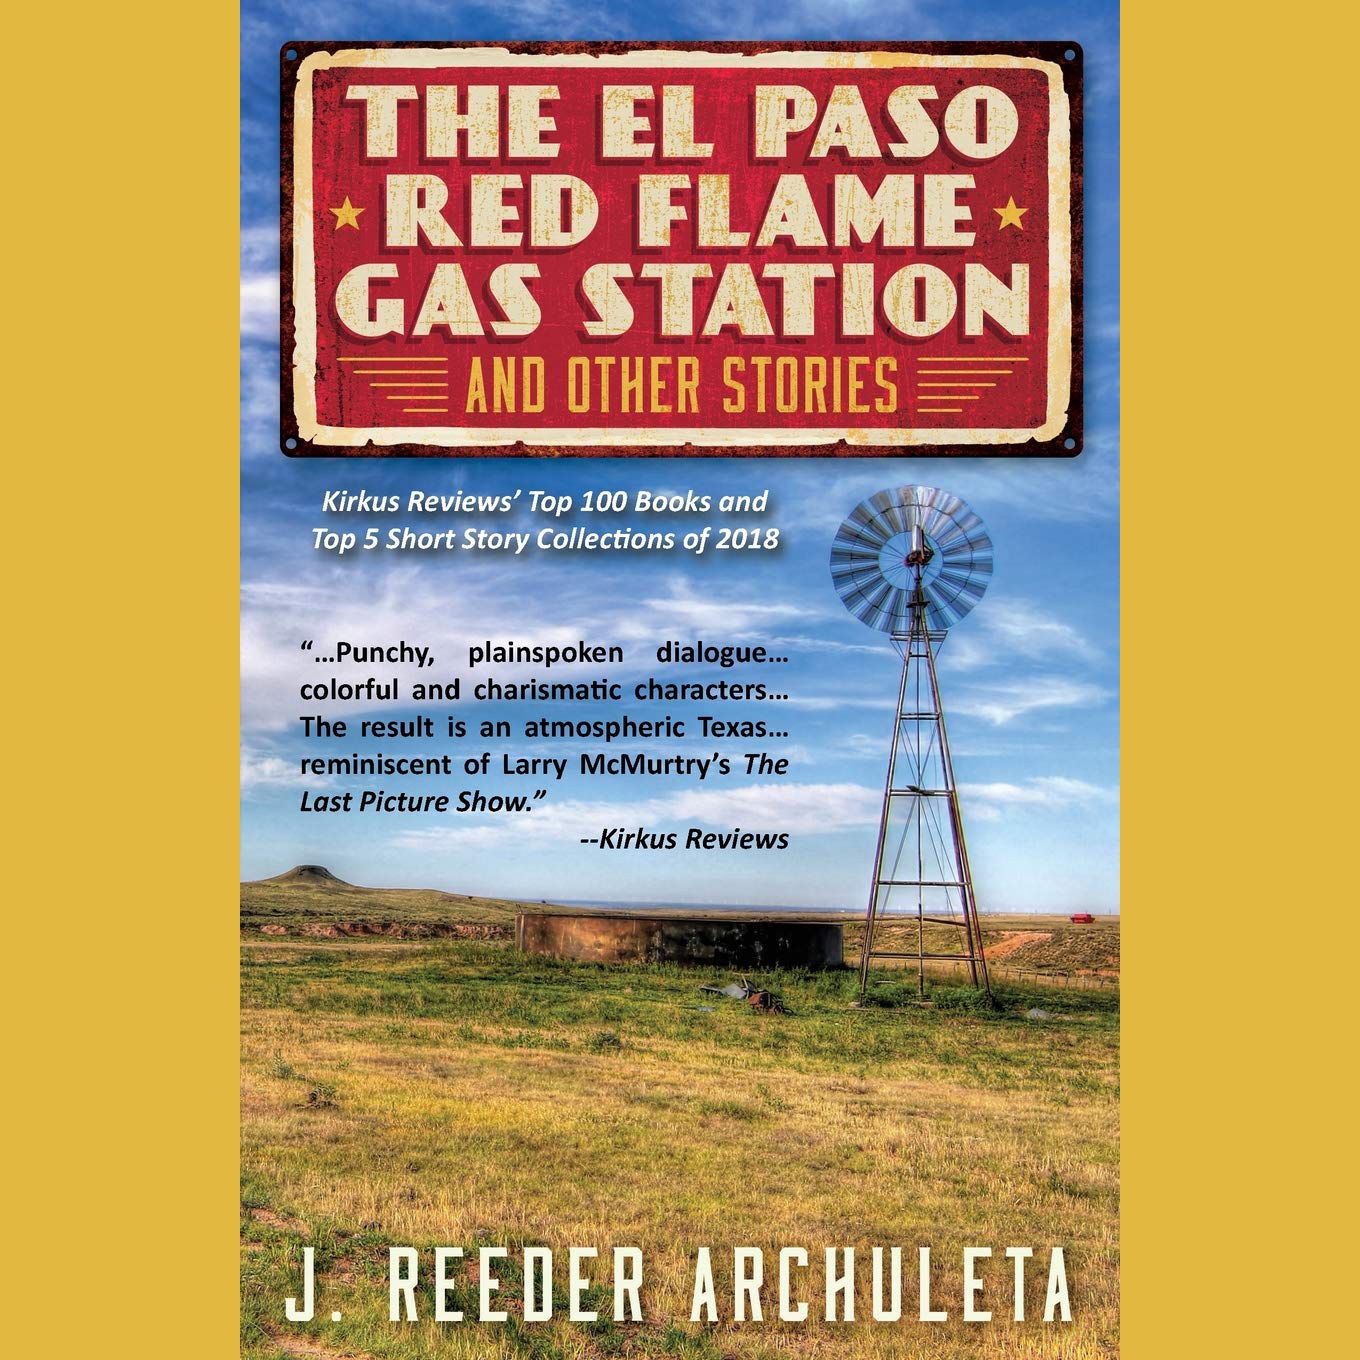 The El Paso Red Flame Gas Station and Other Stories by J. Reeder Archuleta